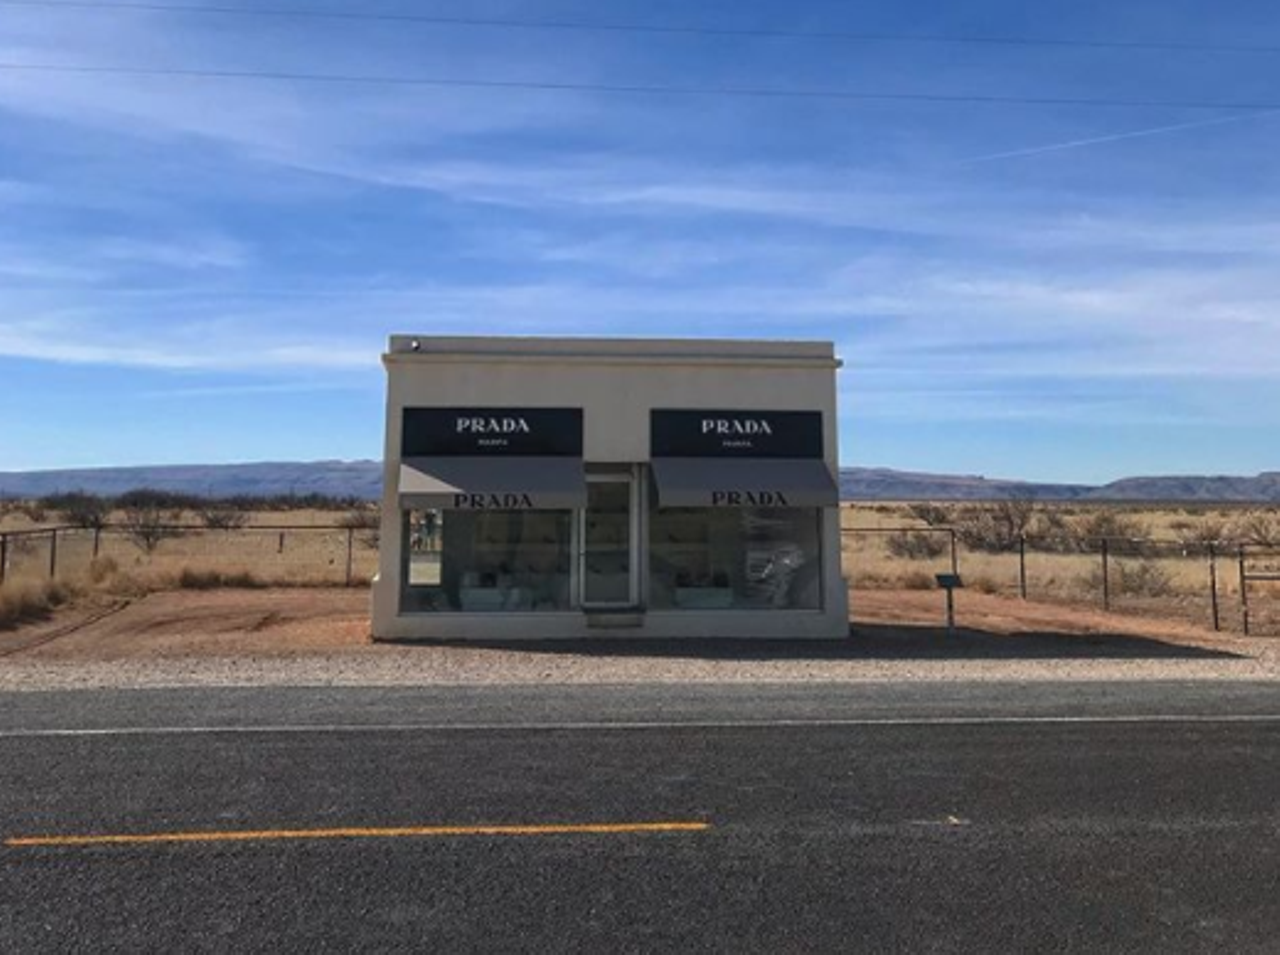 Prada Marfa
US-90, Valentine
Sitting 1.4 miles northwest of Valentine (aww), this 2005 art installation brings a bit of couture to the West Texas desert. While you may not make to the catwalk, go strut your stuff at Prada Marfa.
Photo via Instagram / marcus__the__bear